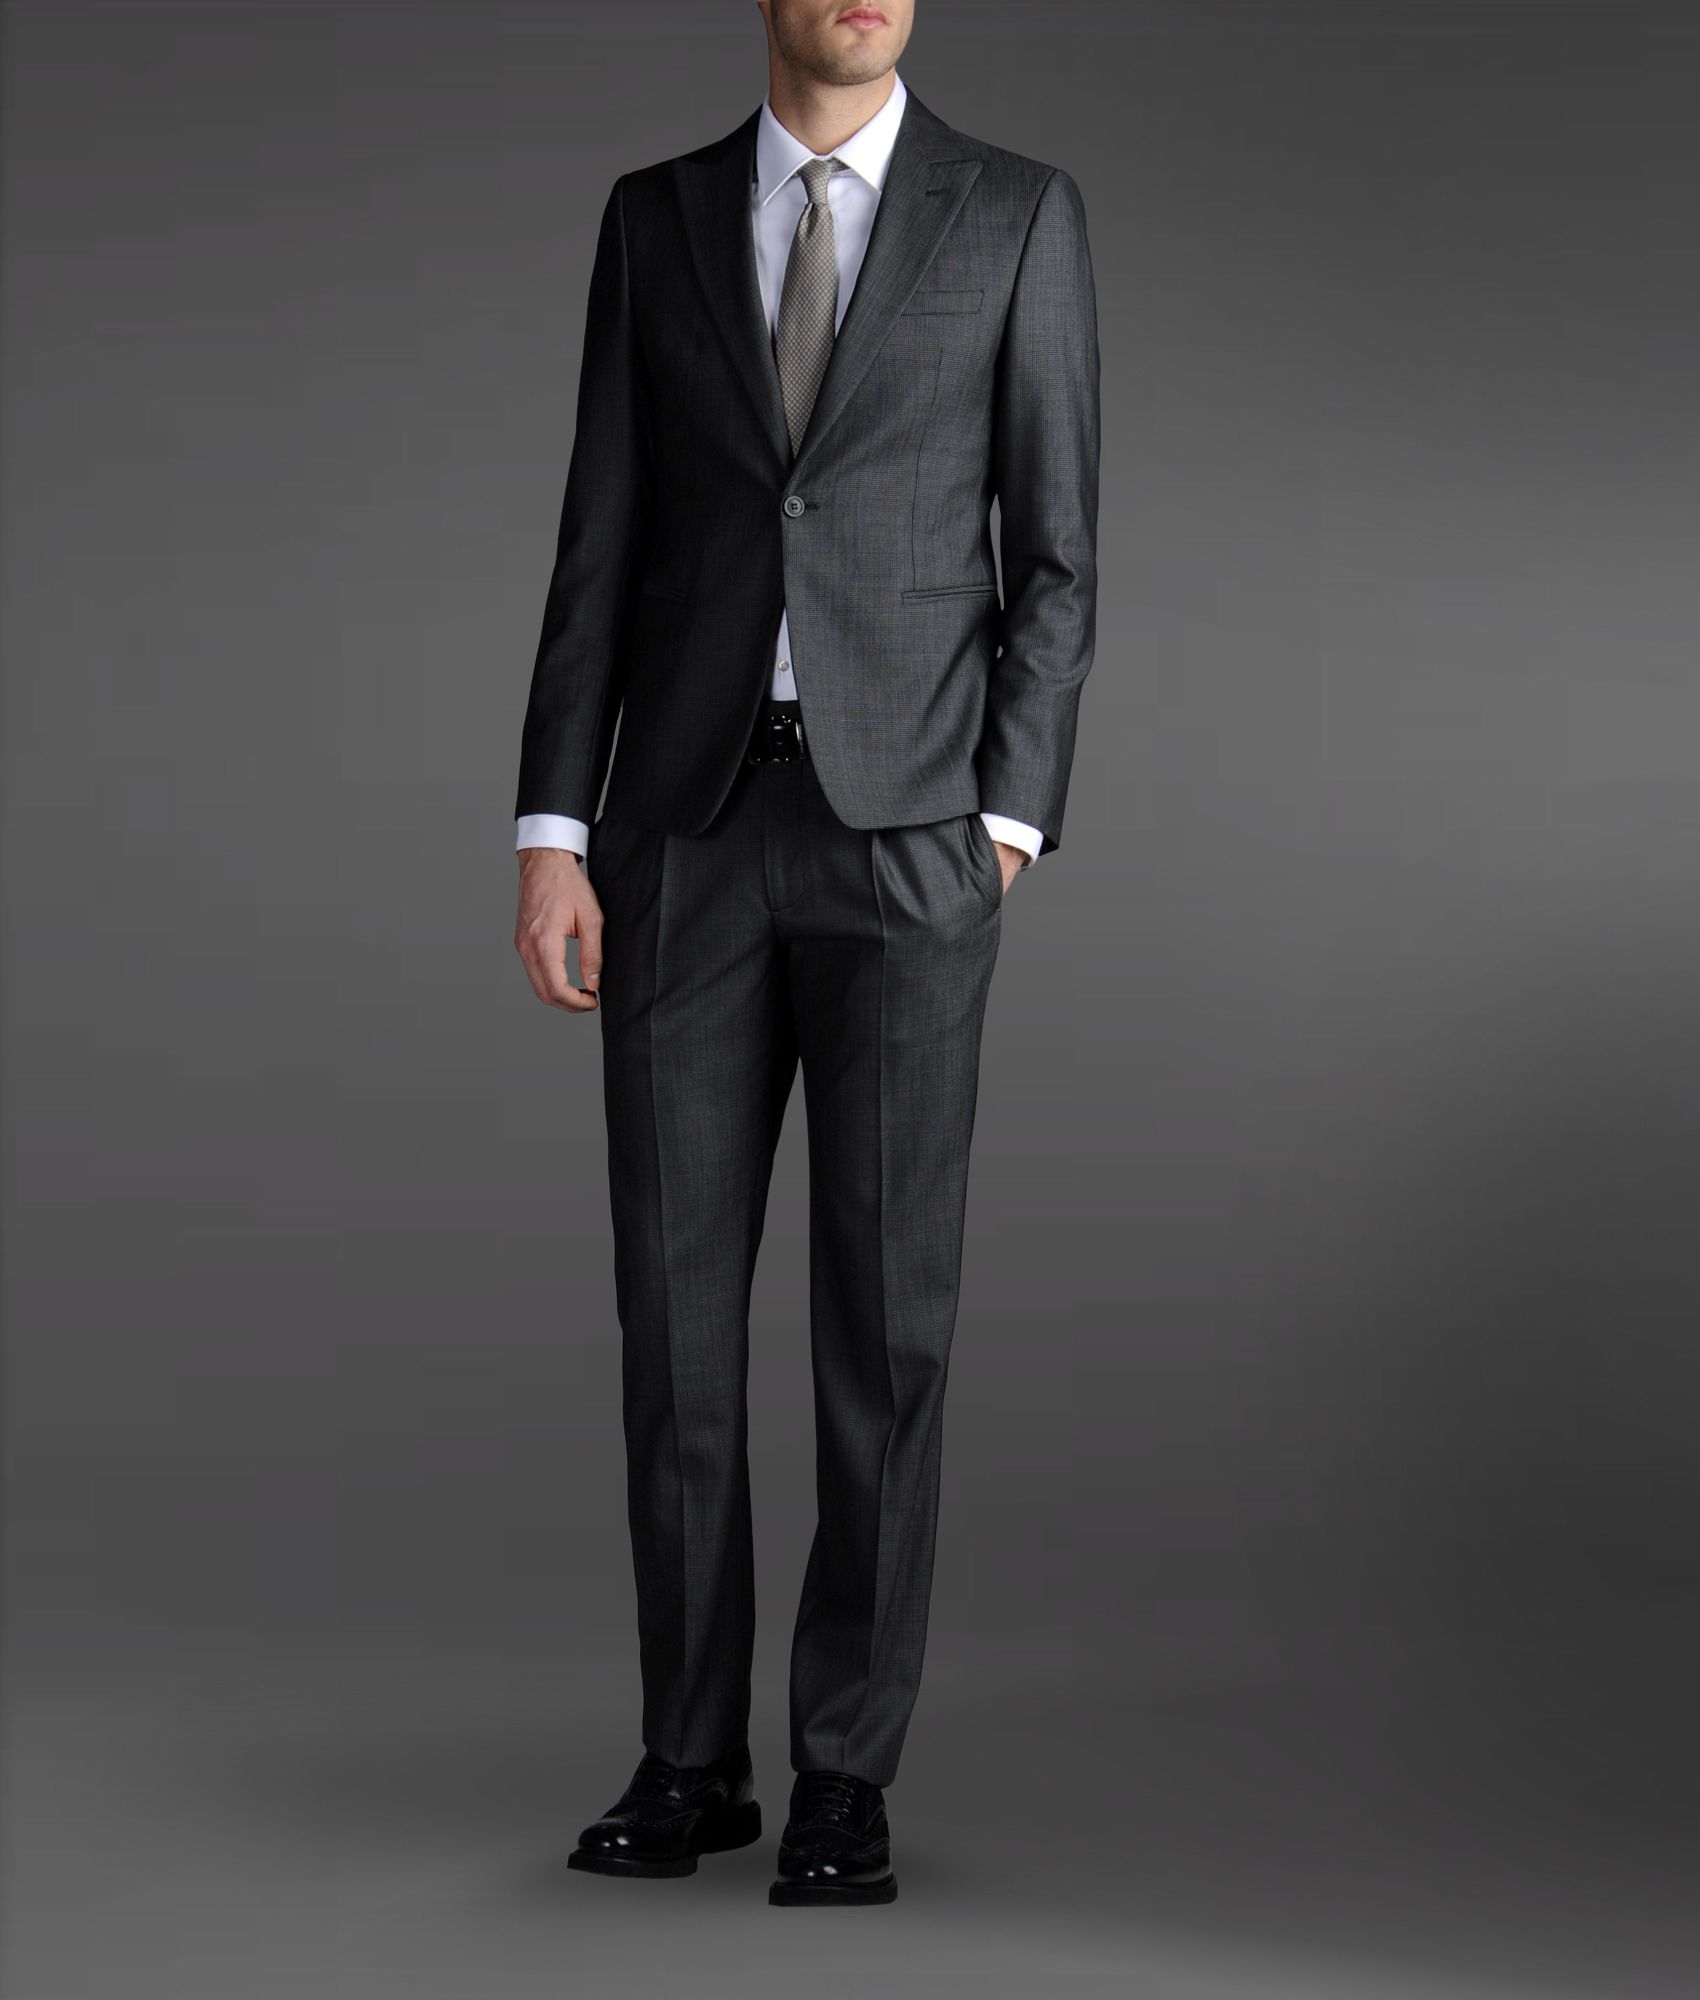 Emporio Armani One Button Suit in Steel Grey (Gray) for Men - Lyst